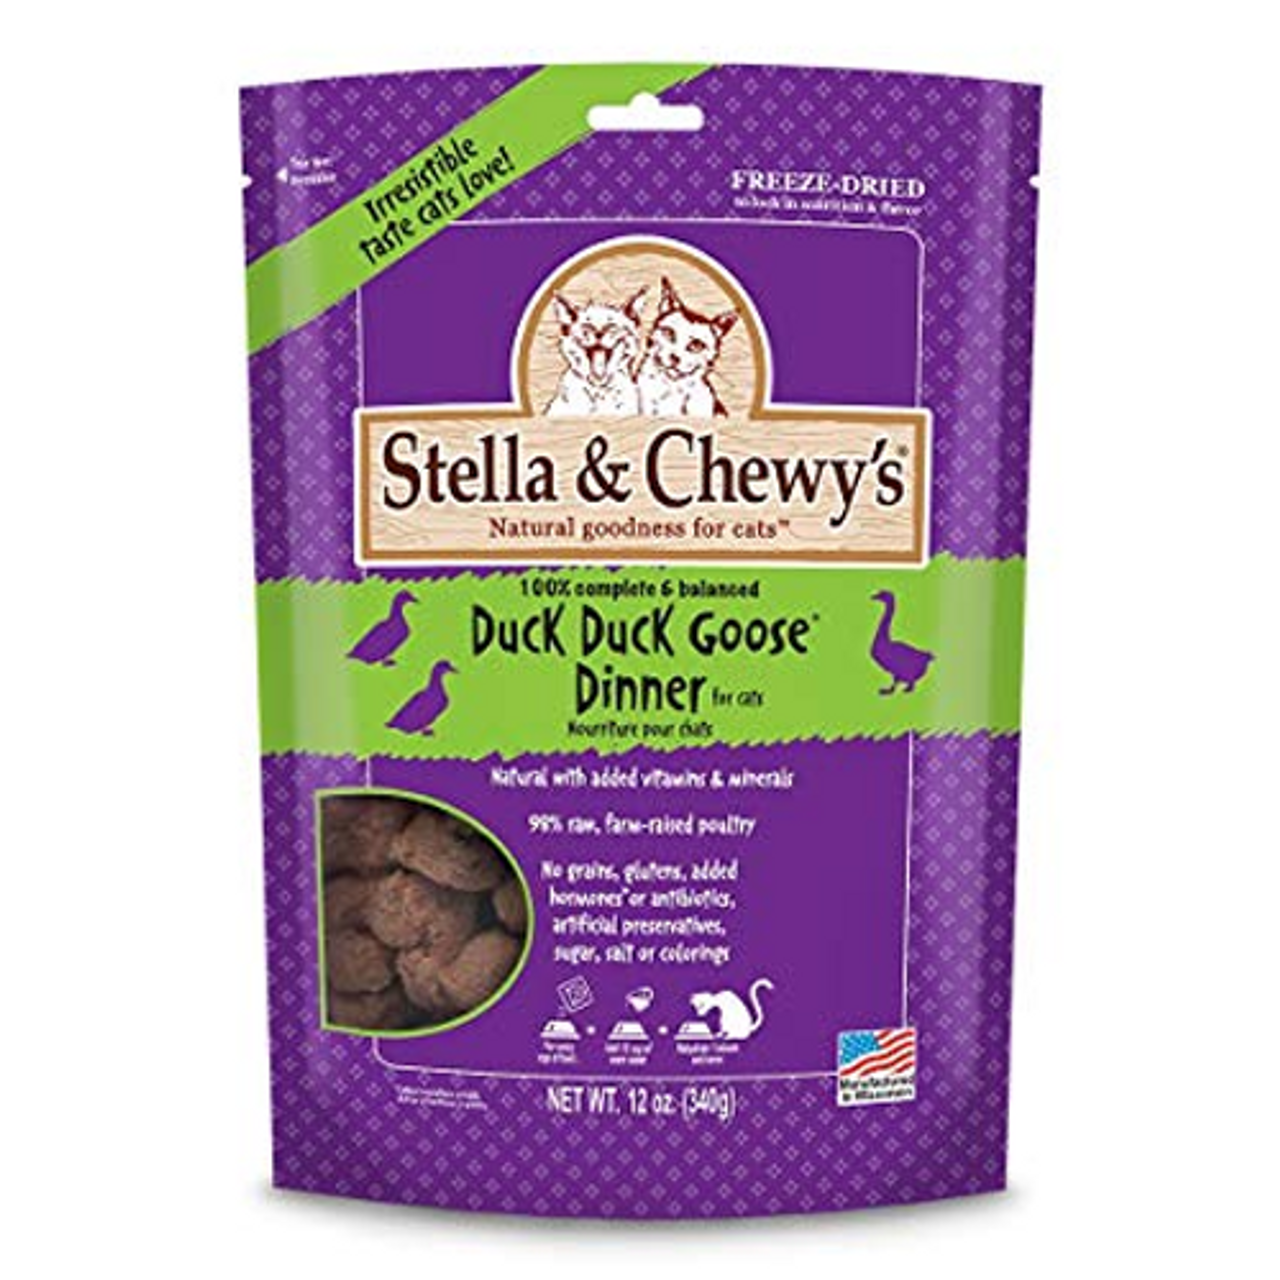 stella and chewy's dehydrated cat food